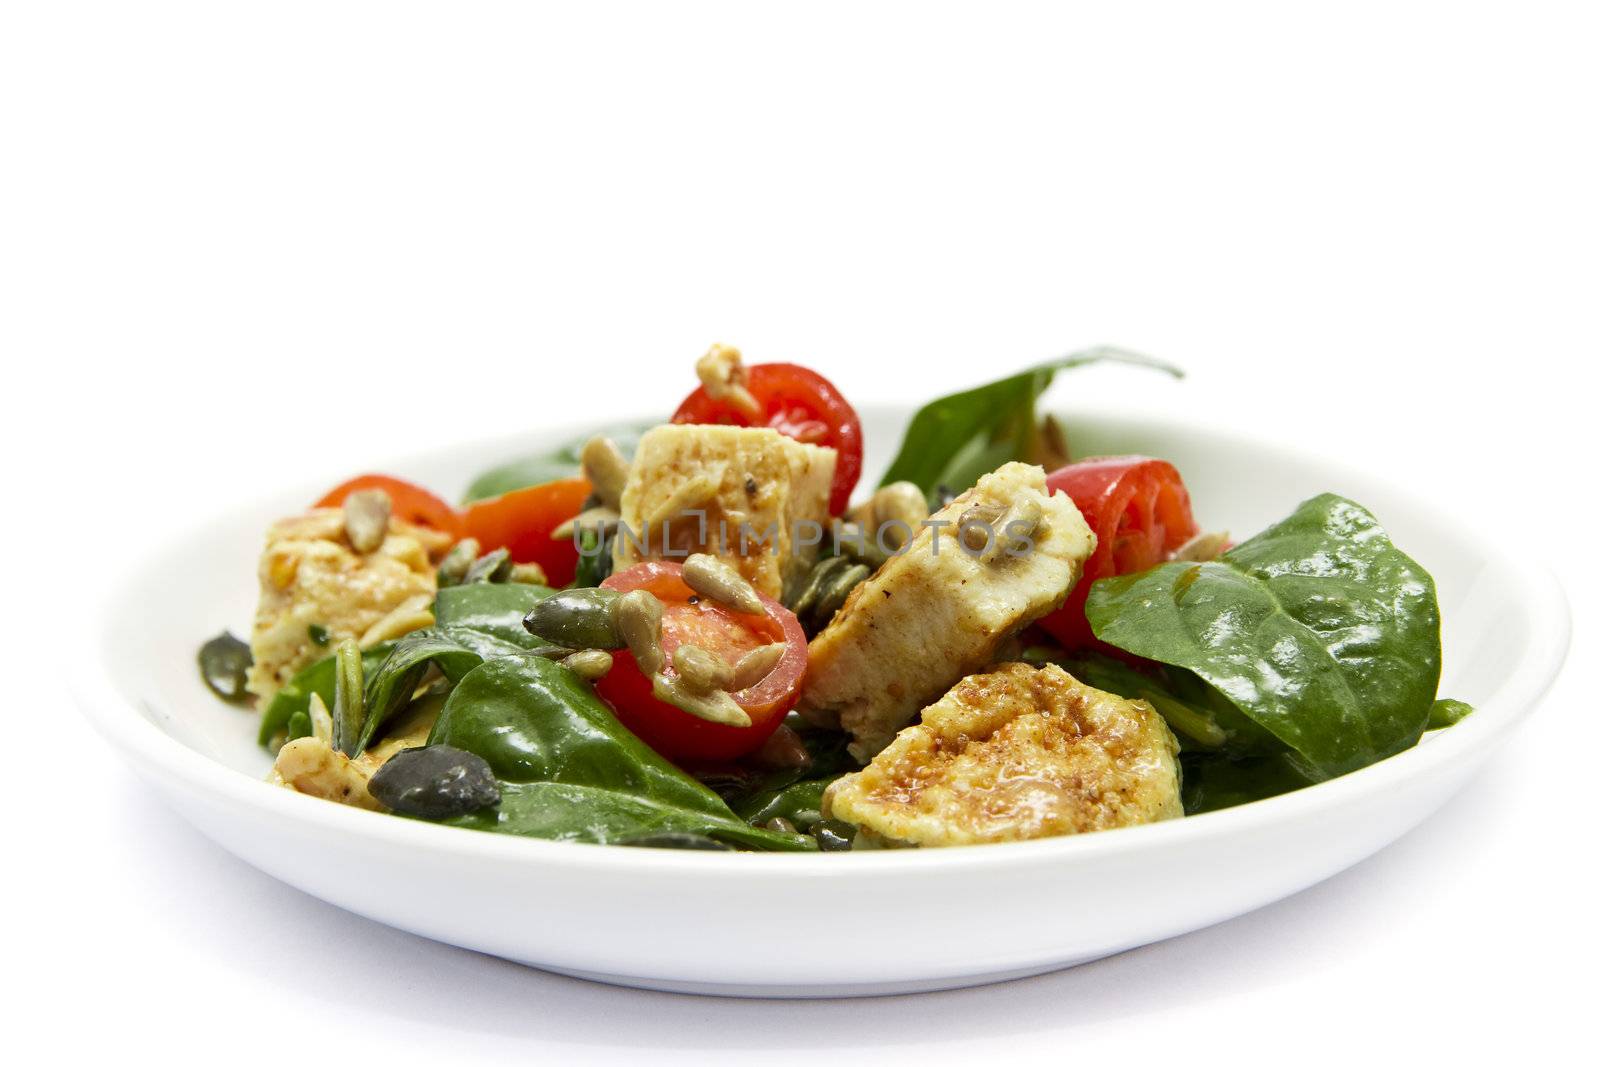 Spinach and Chicken Salad by caldix